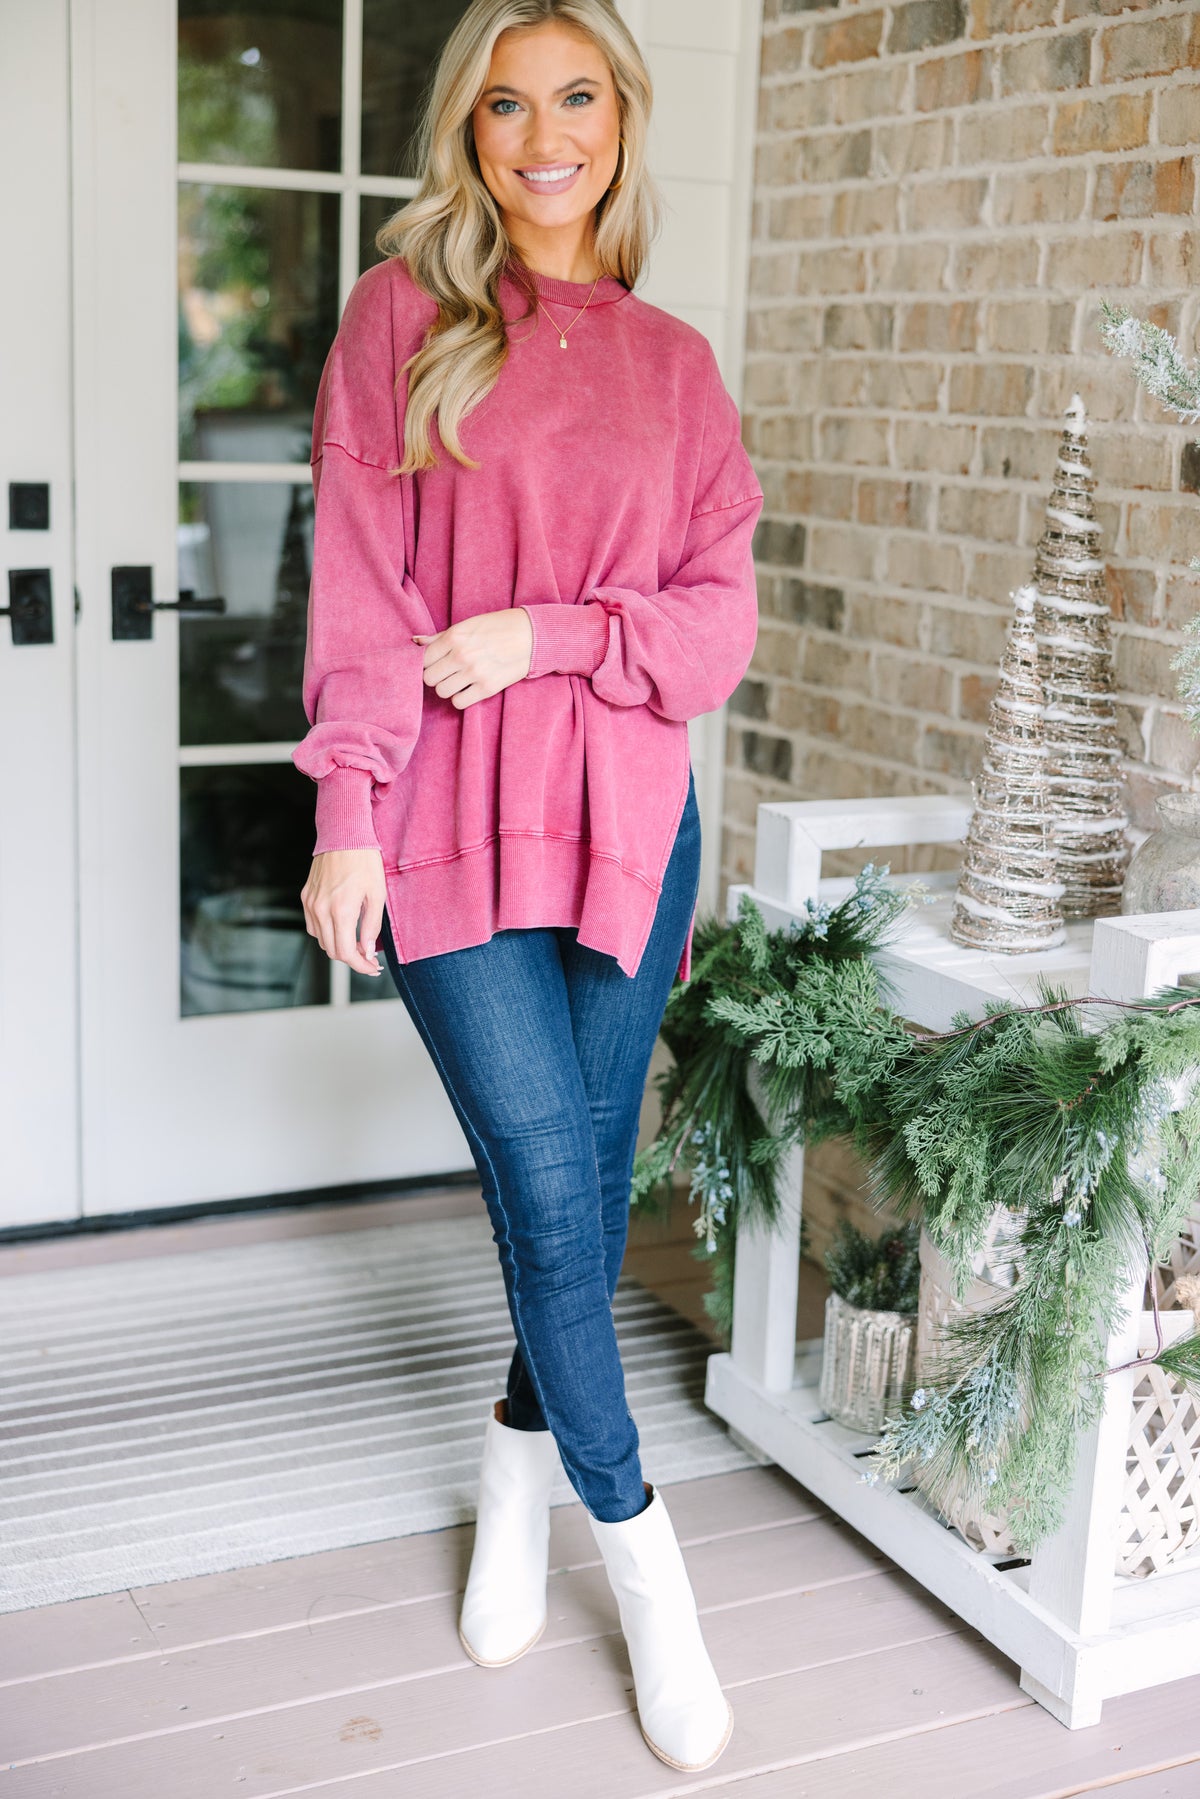 The Slouchy Wine Red Pullover - Casual Cute Pullovers – Shop the Mint